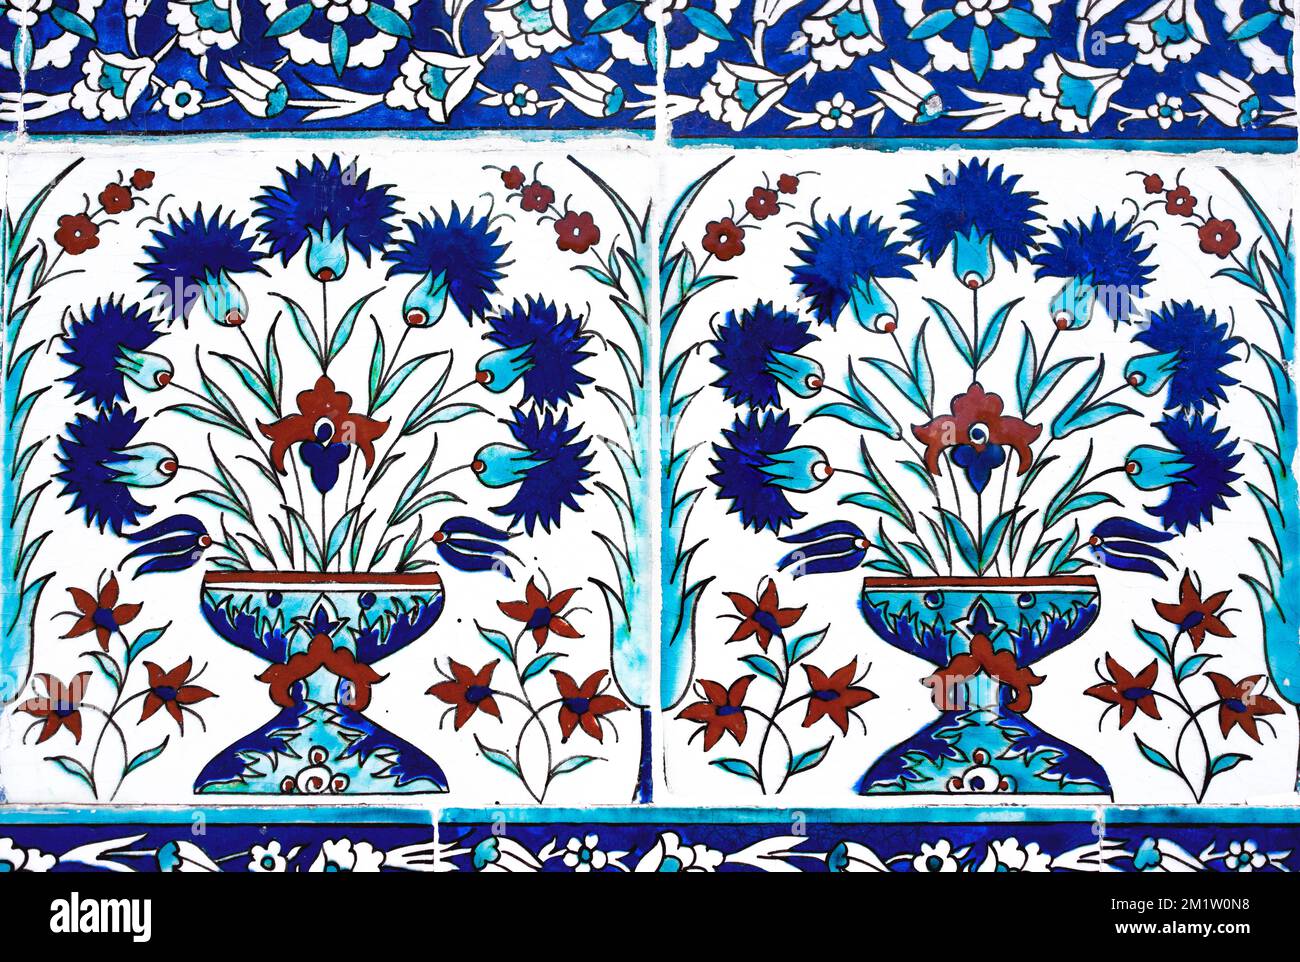 Ancient handmade tiles of the Ottoman Imperial Harem in Topkapi Palace, Istanbul, Turkey. Stock Photo